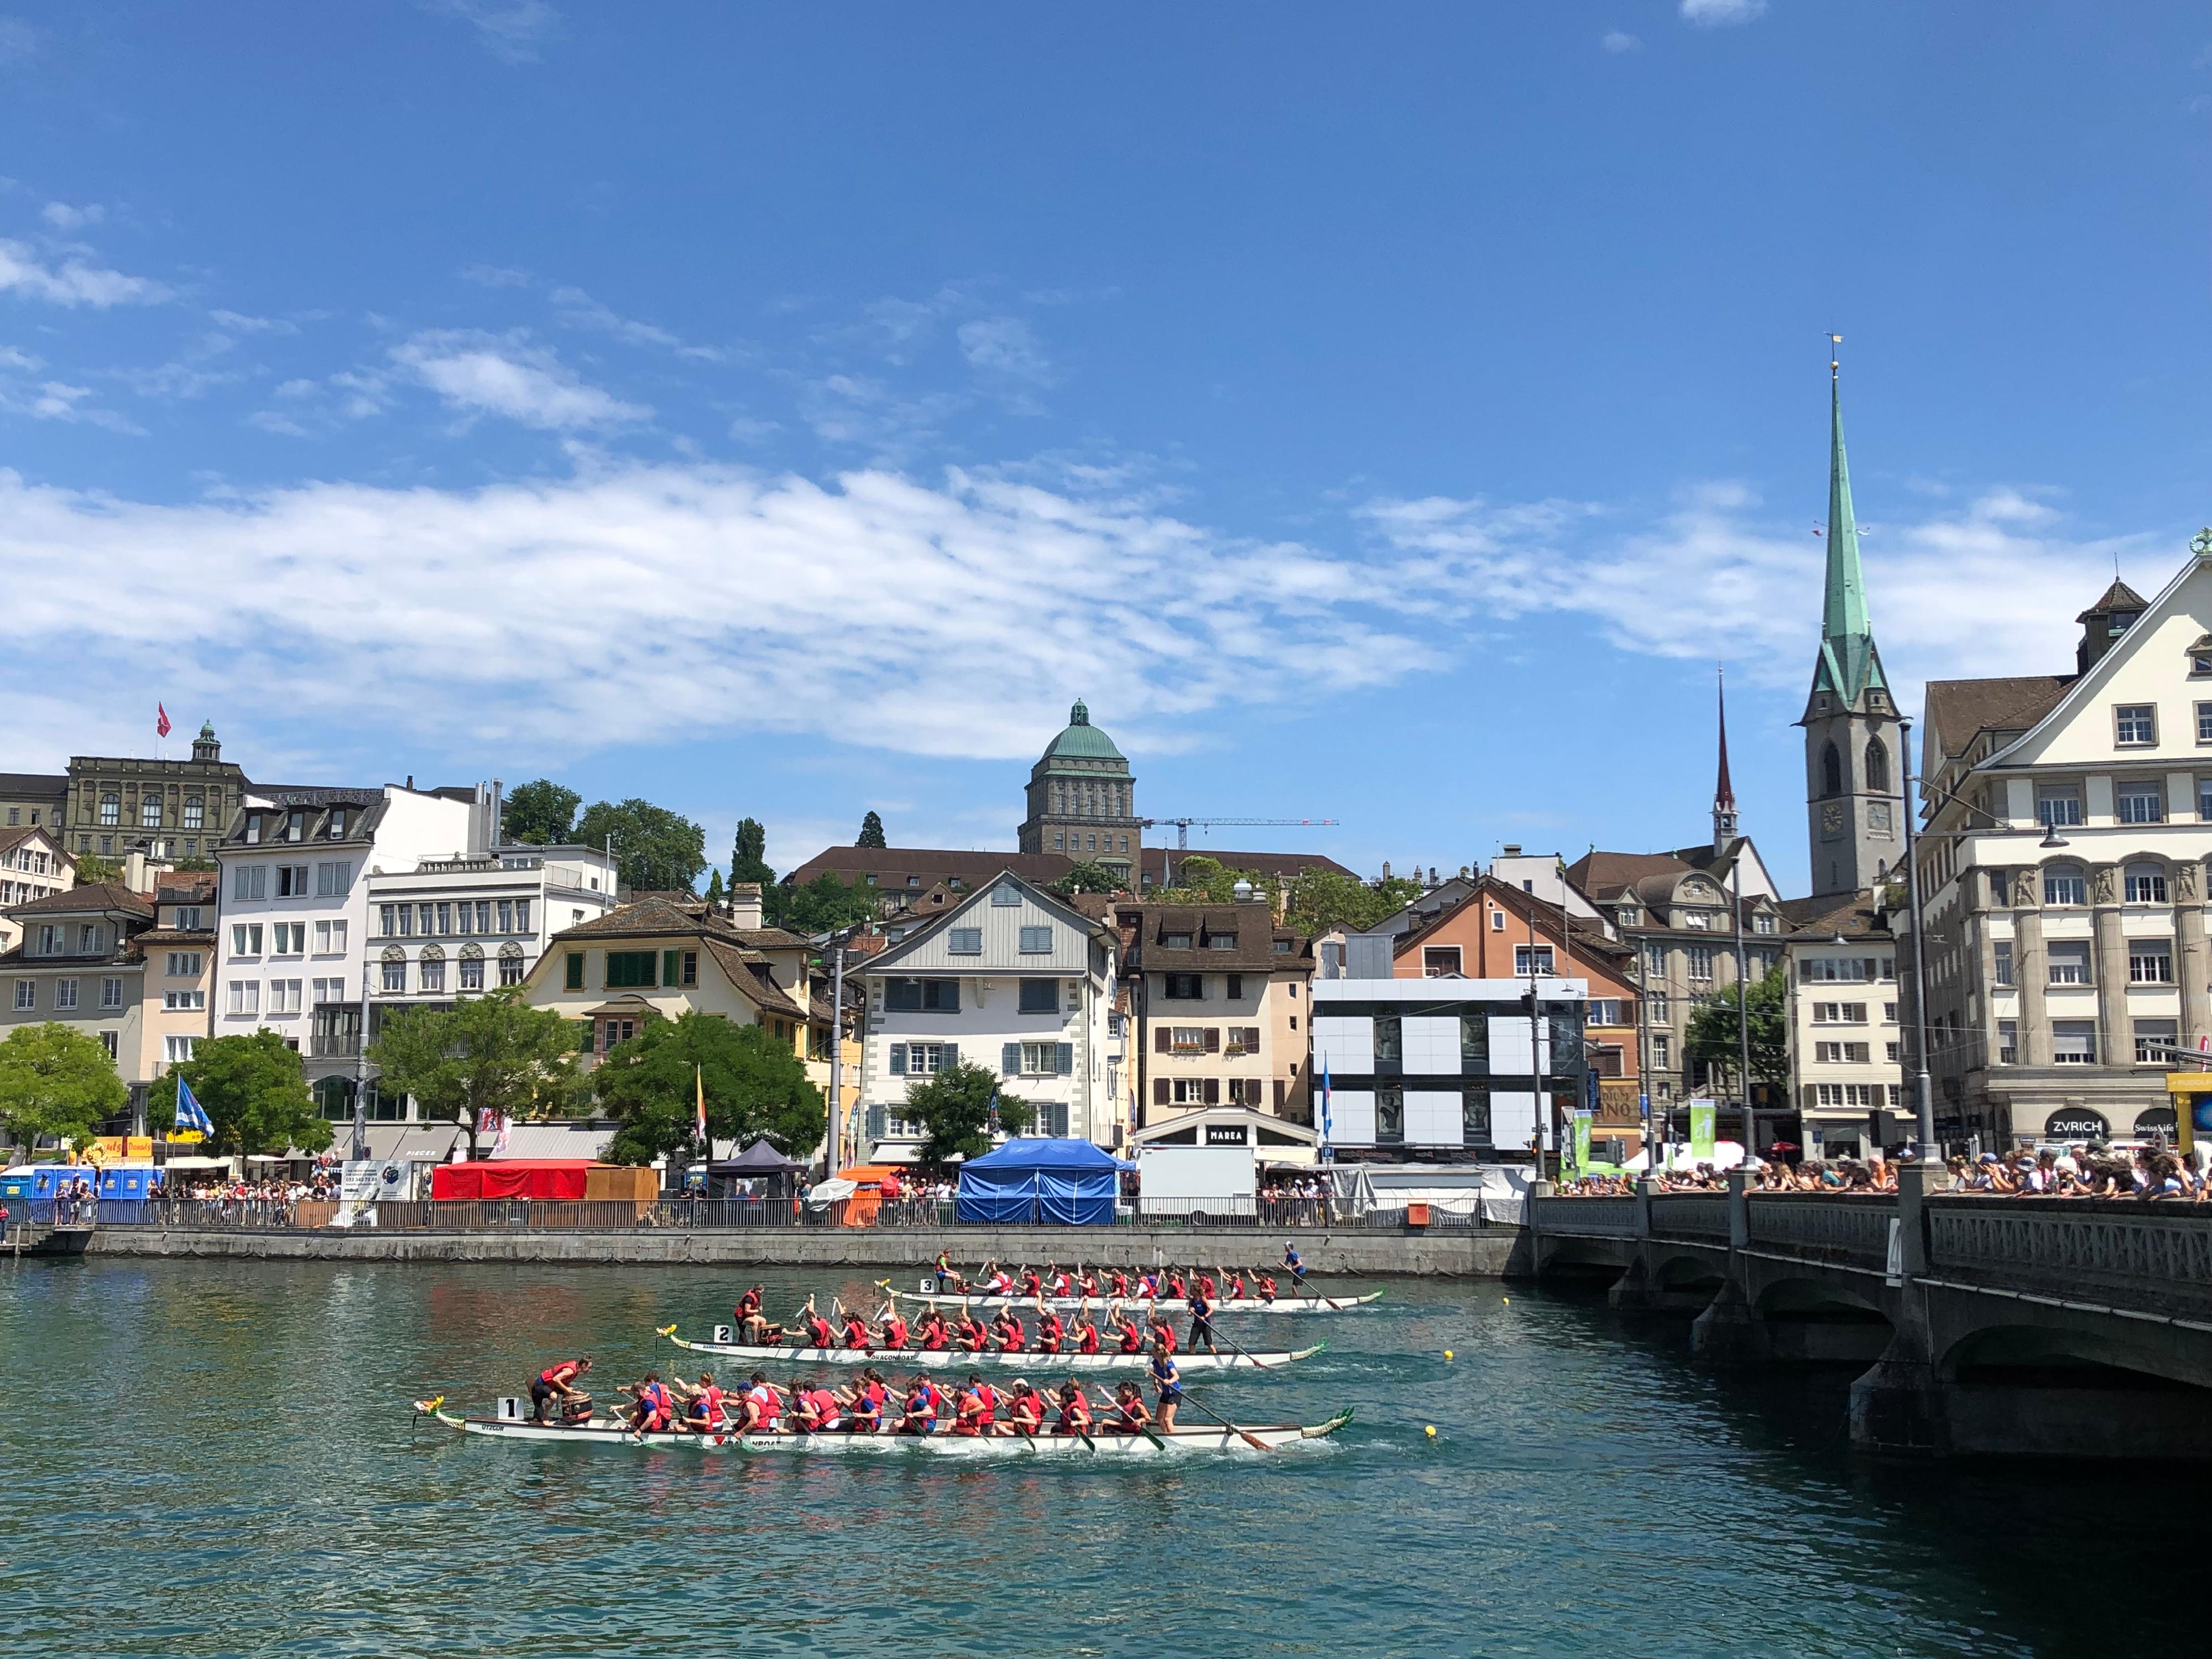 The Hong Kong Economic and Trade Office, Berlin, sponsored the Dragon Boat Race which took place on July 8 (Zurich time) in Switzerland. Photo shows teams playing in the final race.